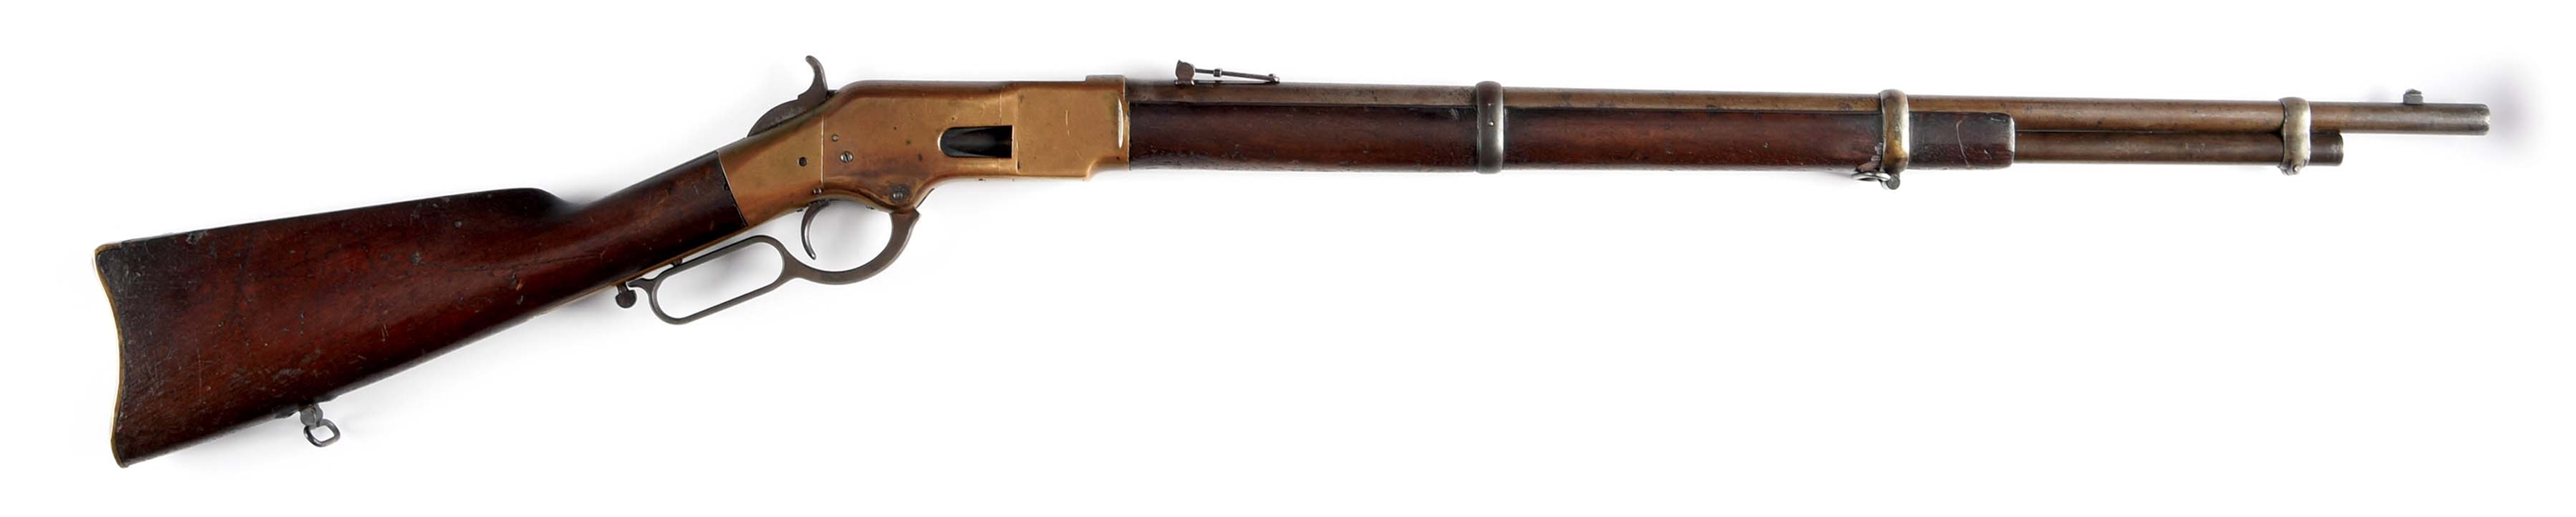 (A) WINCHESTER MODEL 1866 MUSKET (1870).